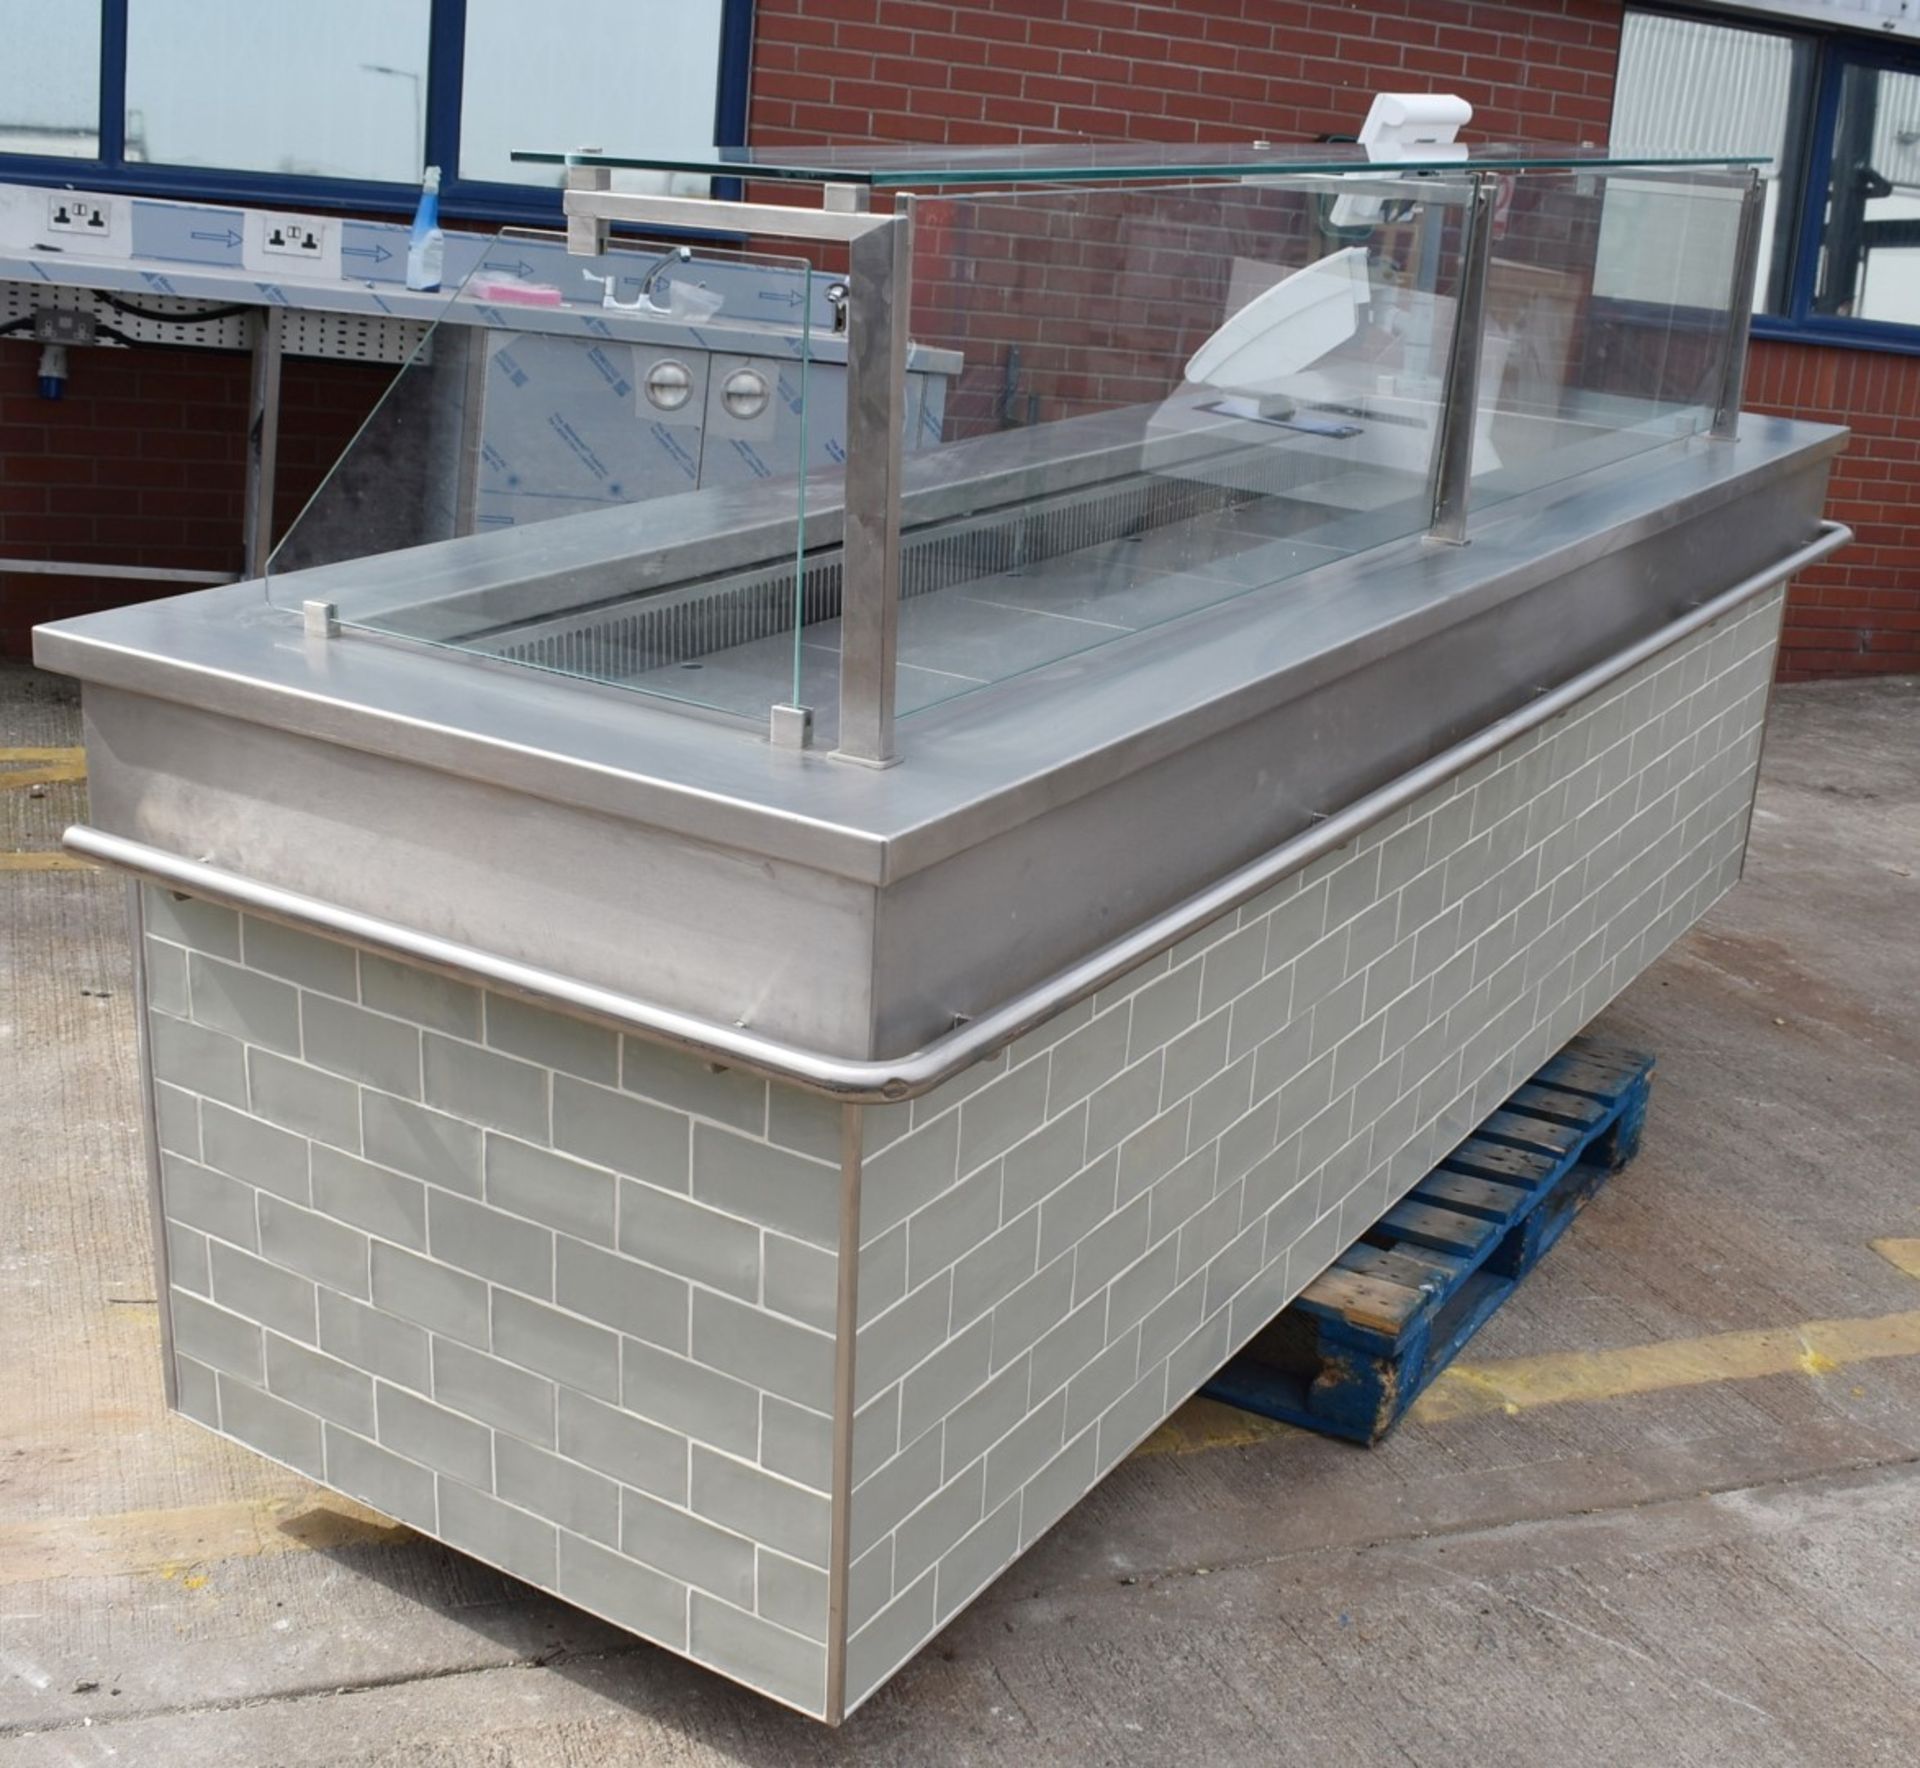 1 x Commercial Food Display Counter Featuring a Fan Blown Well, Glass Viewing Screen, Tiles Front - Image 36 of 60